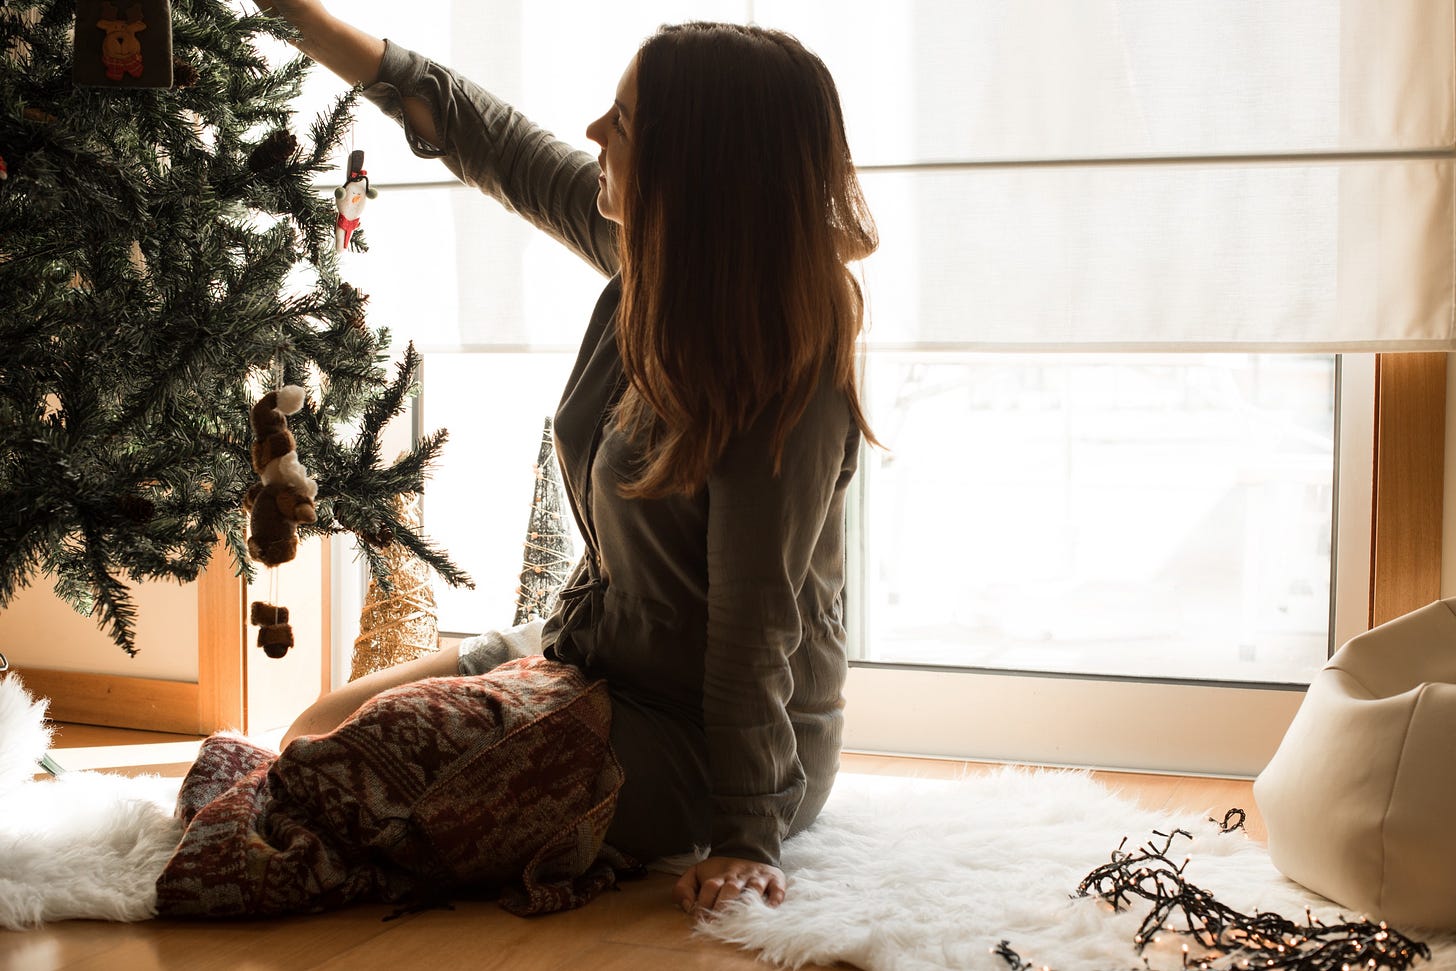 A woman happily decorates a Christmas tree on her own.